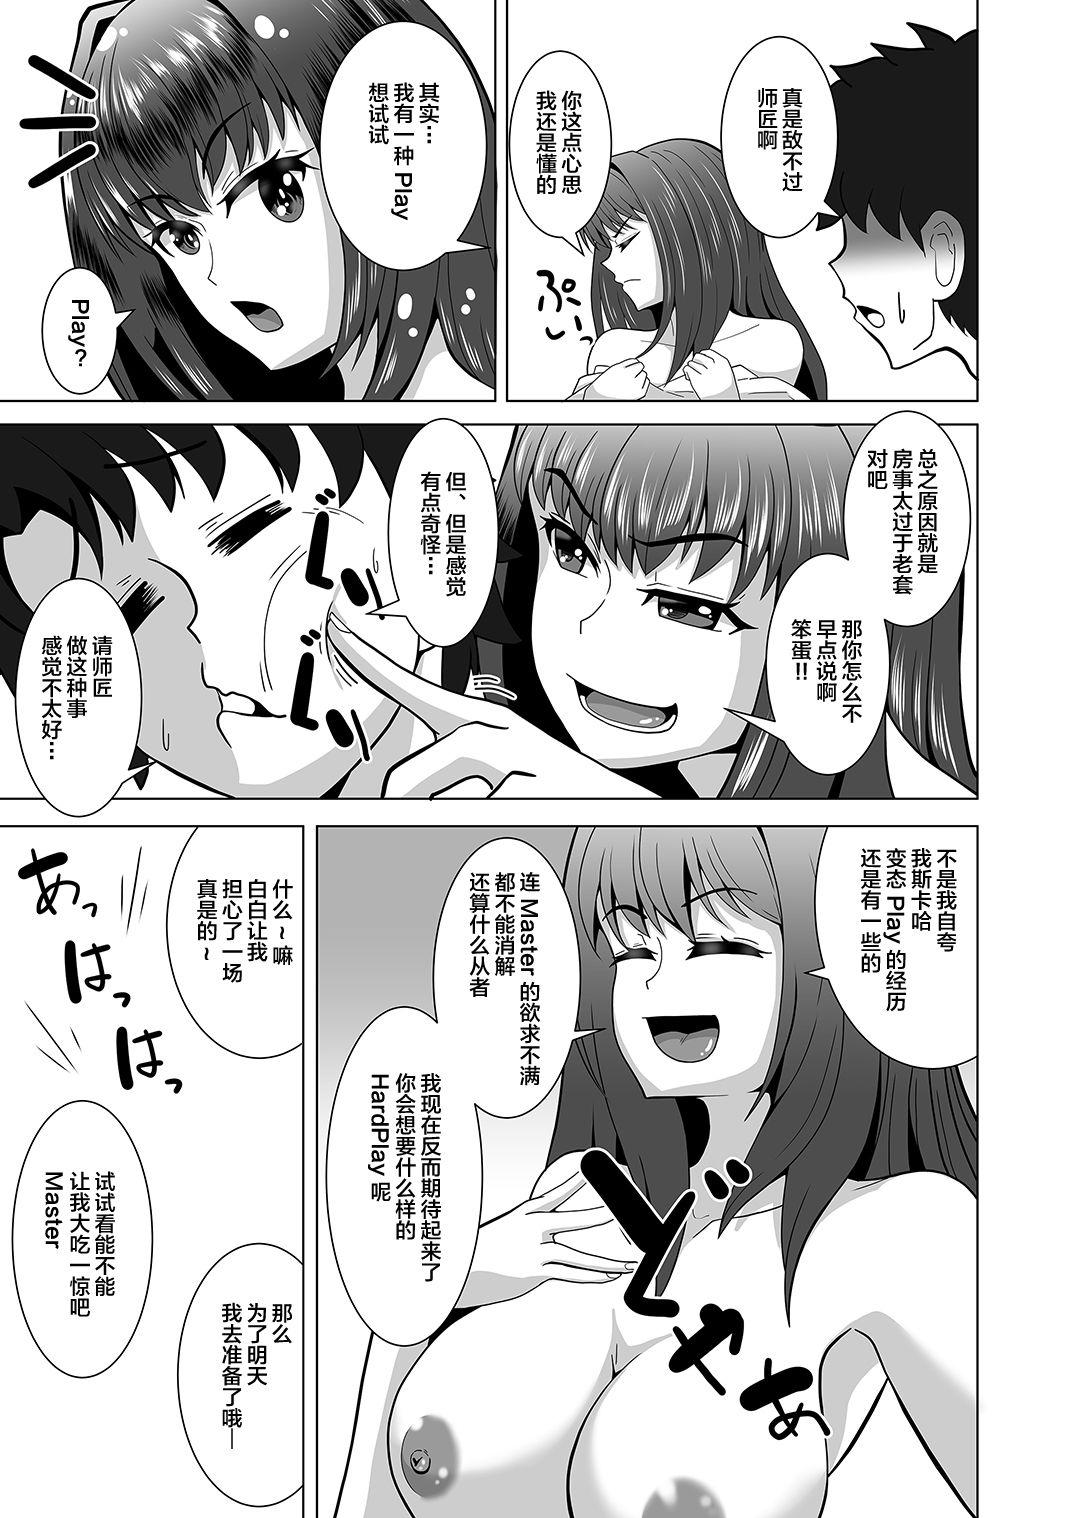 Redbone Scathach-chan to Issho - Fate grand order Vibrator - Page 5